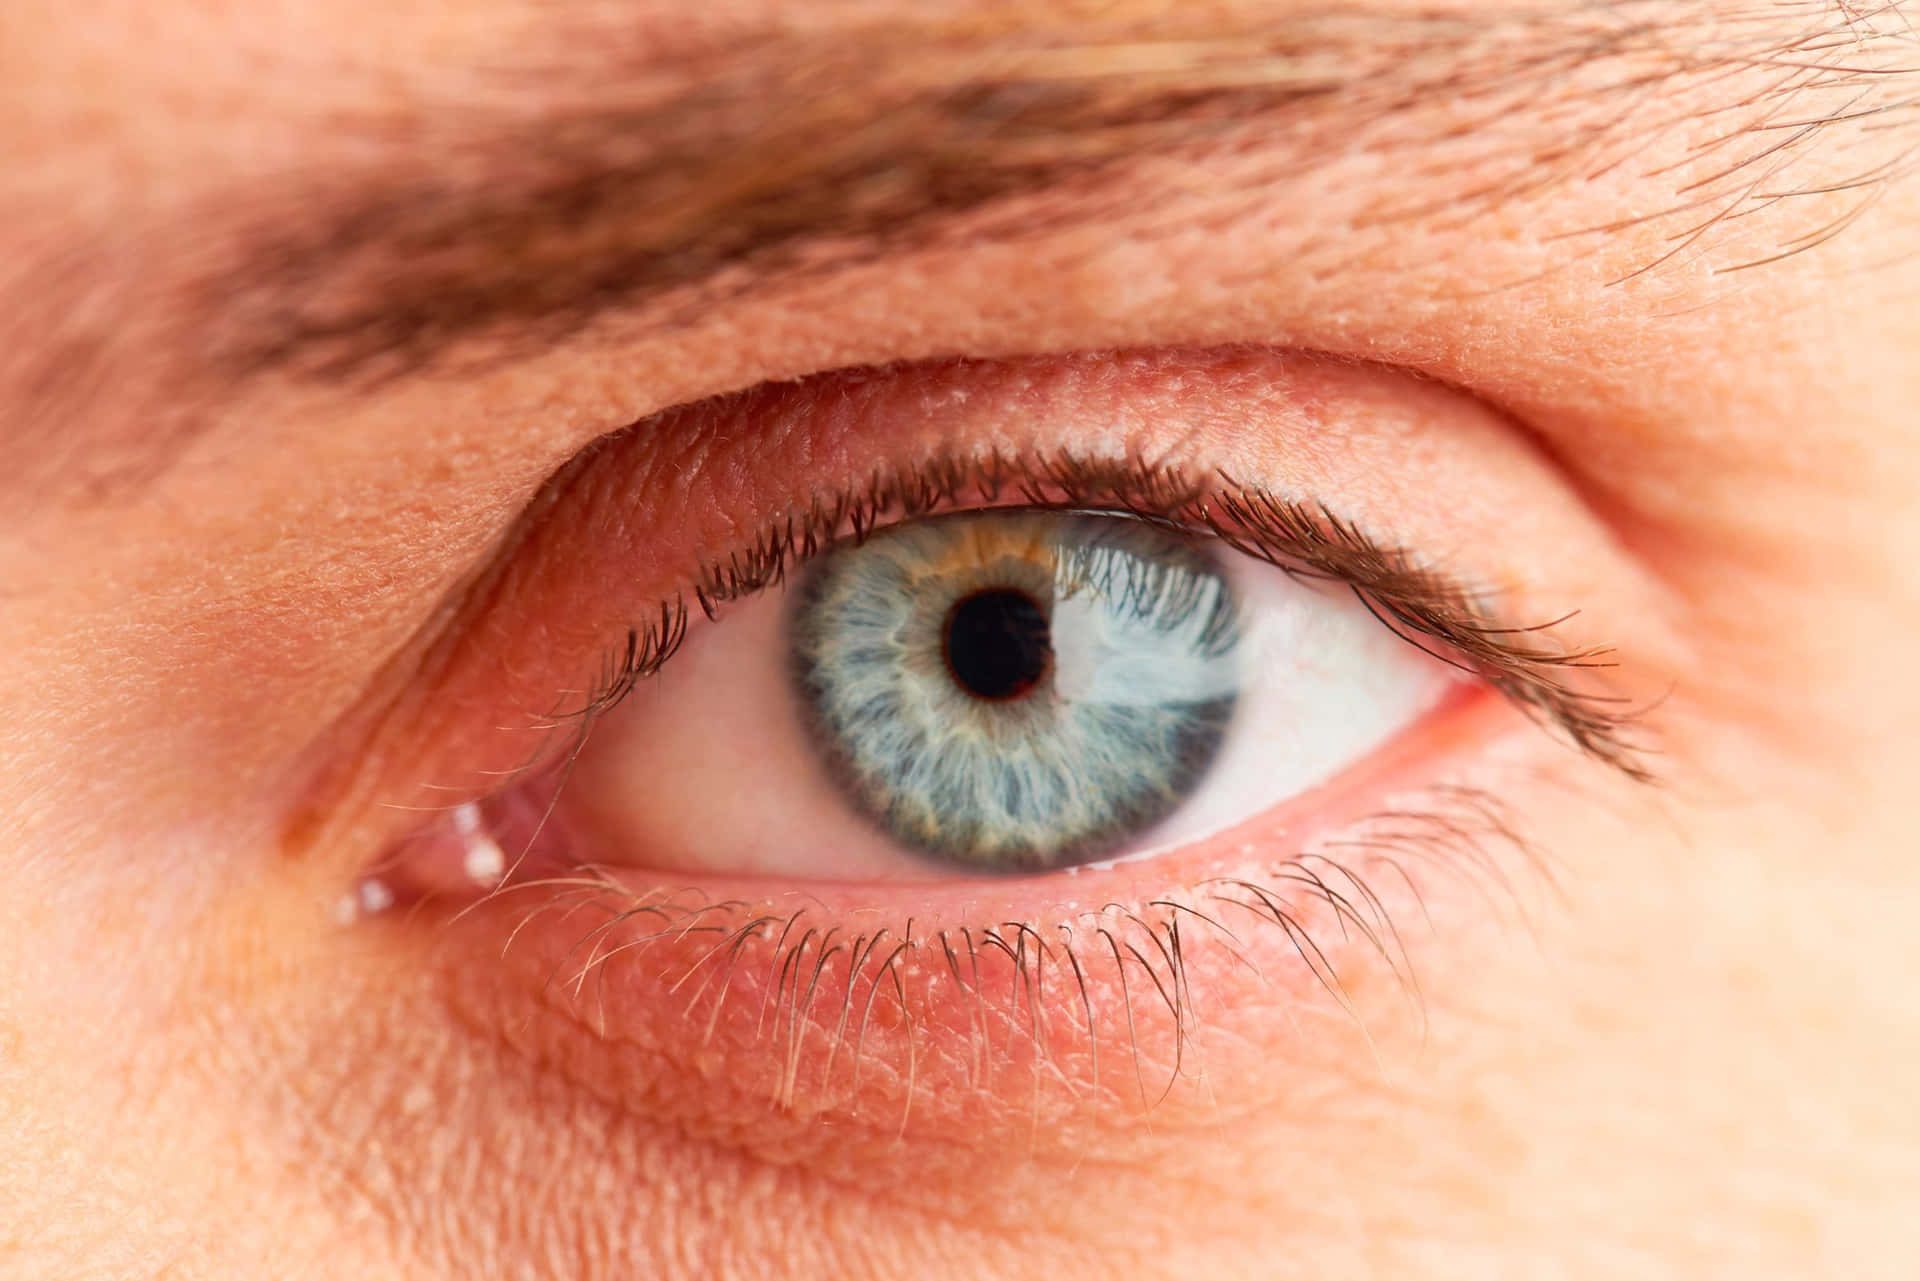 A Close Up Of A Man's Eye With Blue Eyes